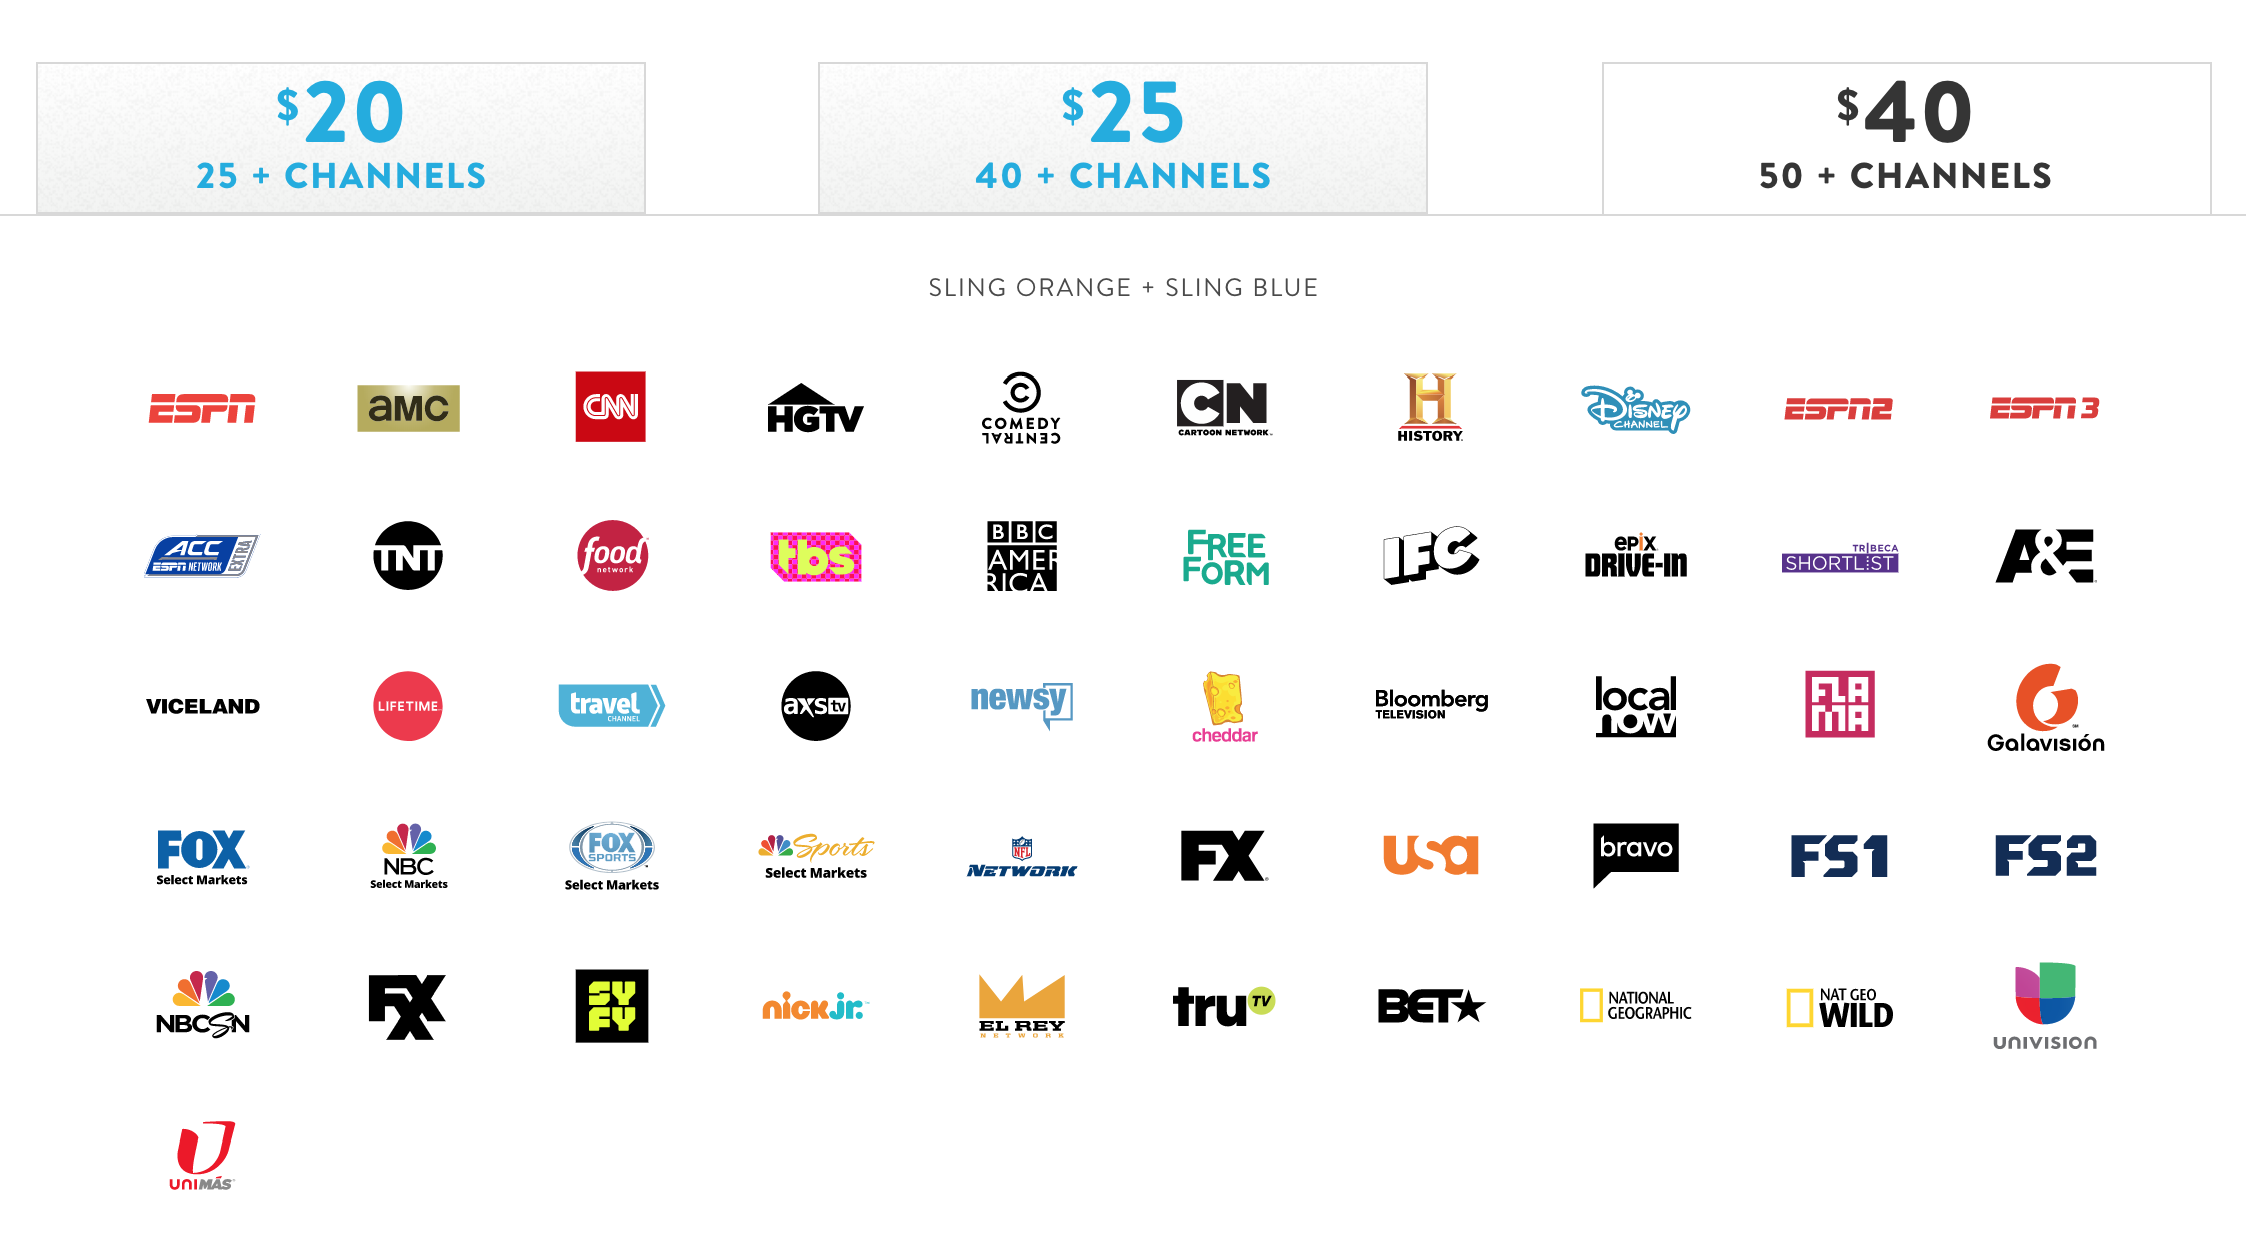 sling tv packages 2020 prices